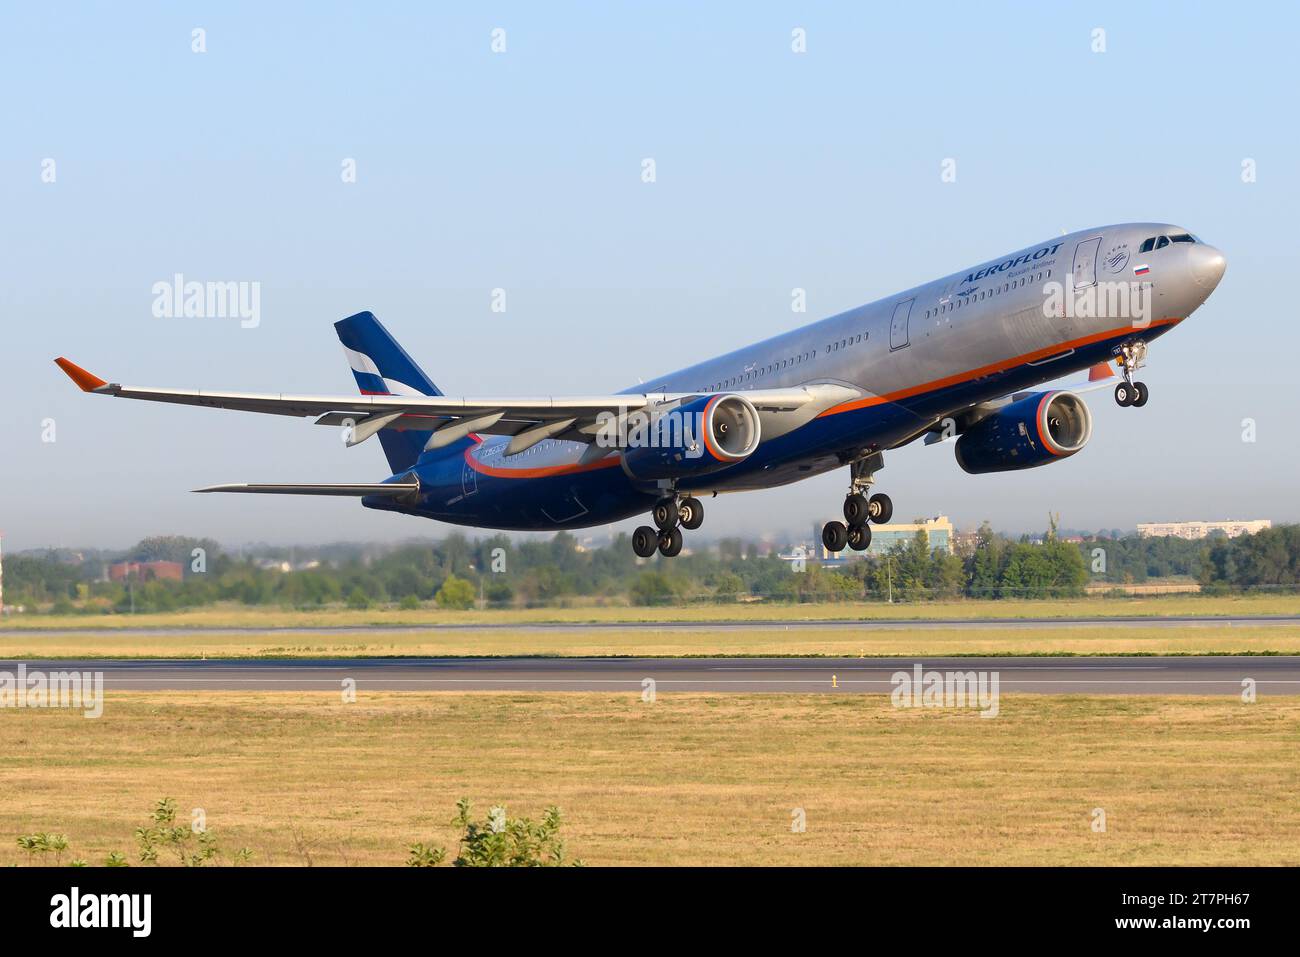 Aeroflot Airbus A330 airplane taking off. Aeroflot Russian Airlines Airbus A330-300 aircraft with Russian registration RA-73783 during take off. Stock Photo